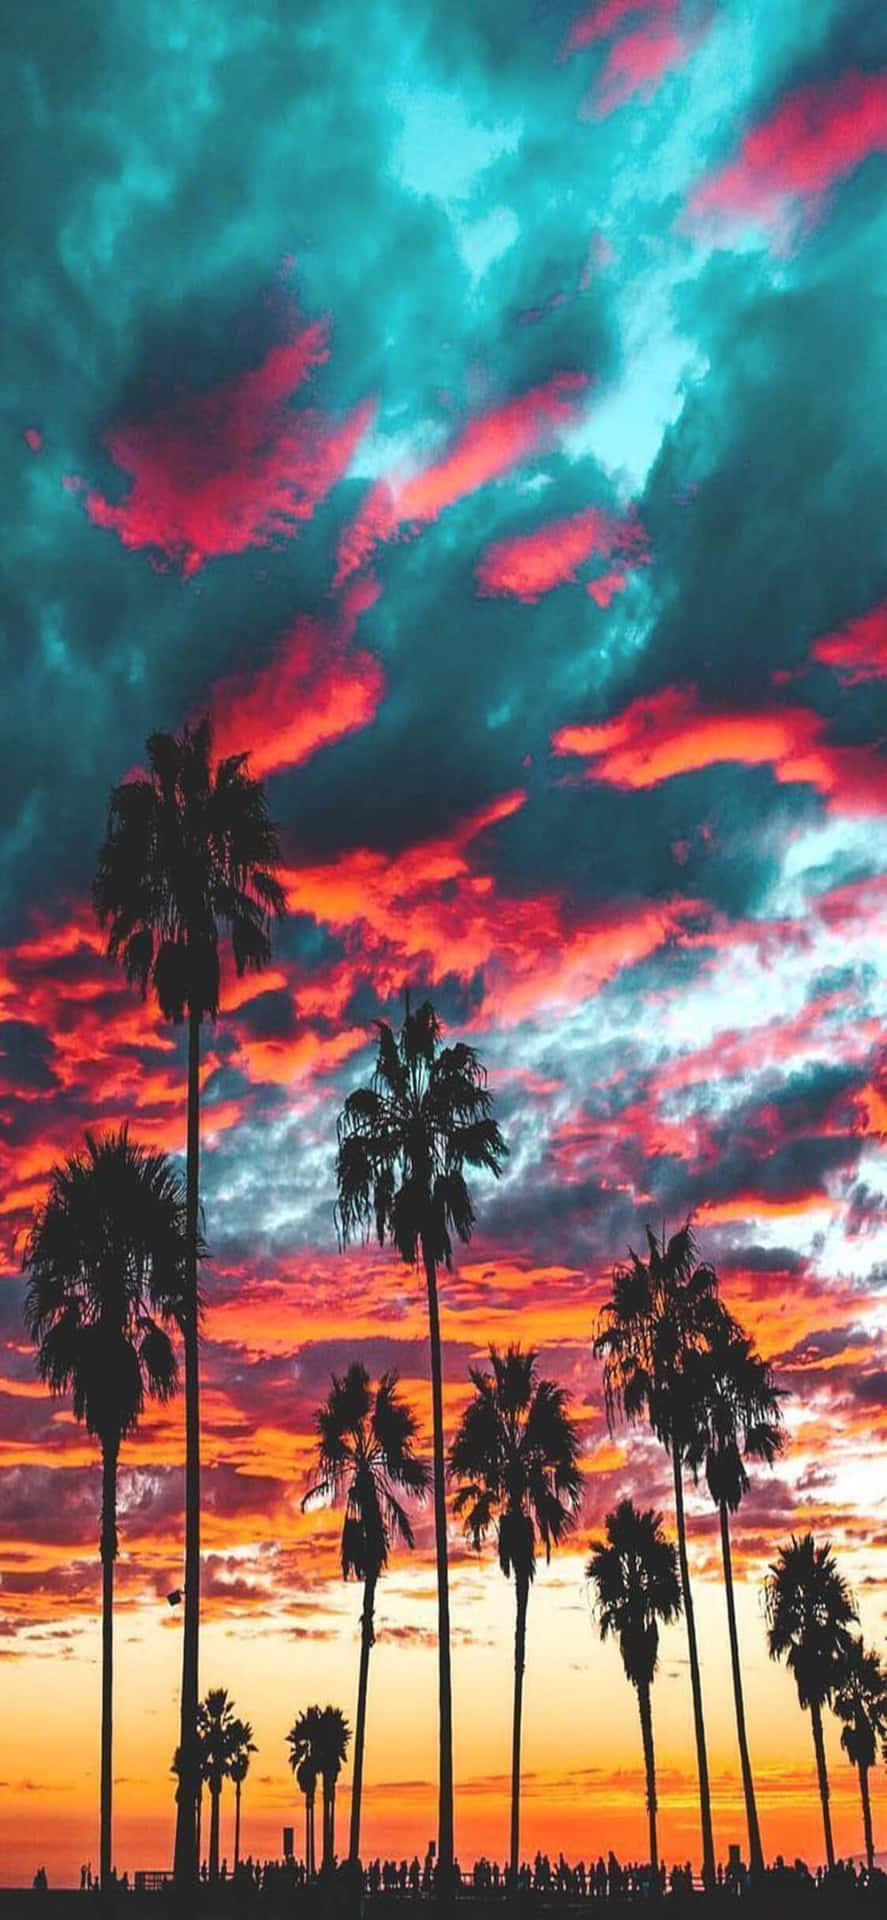 Download Iphone X California Background 1125 X 2436 | Wallpapers.com